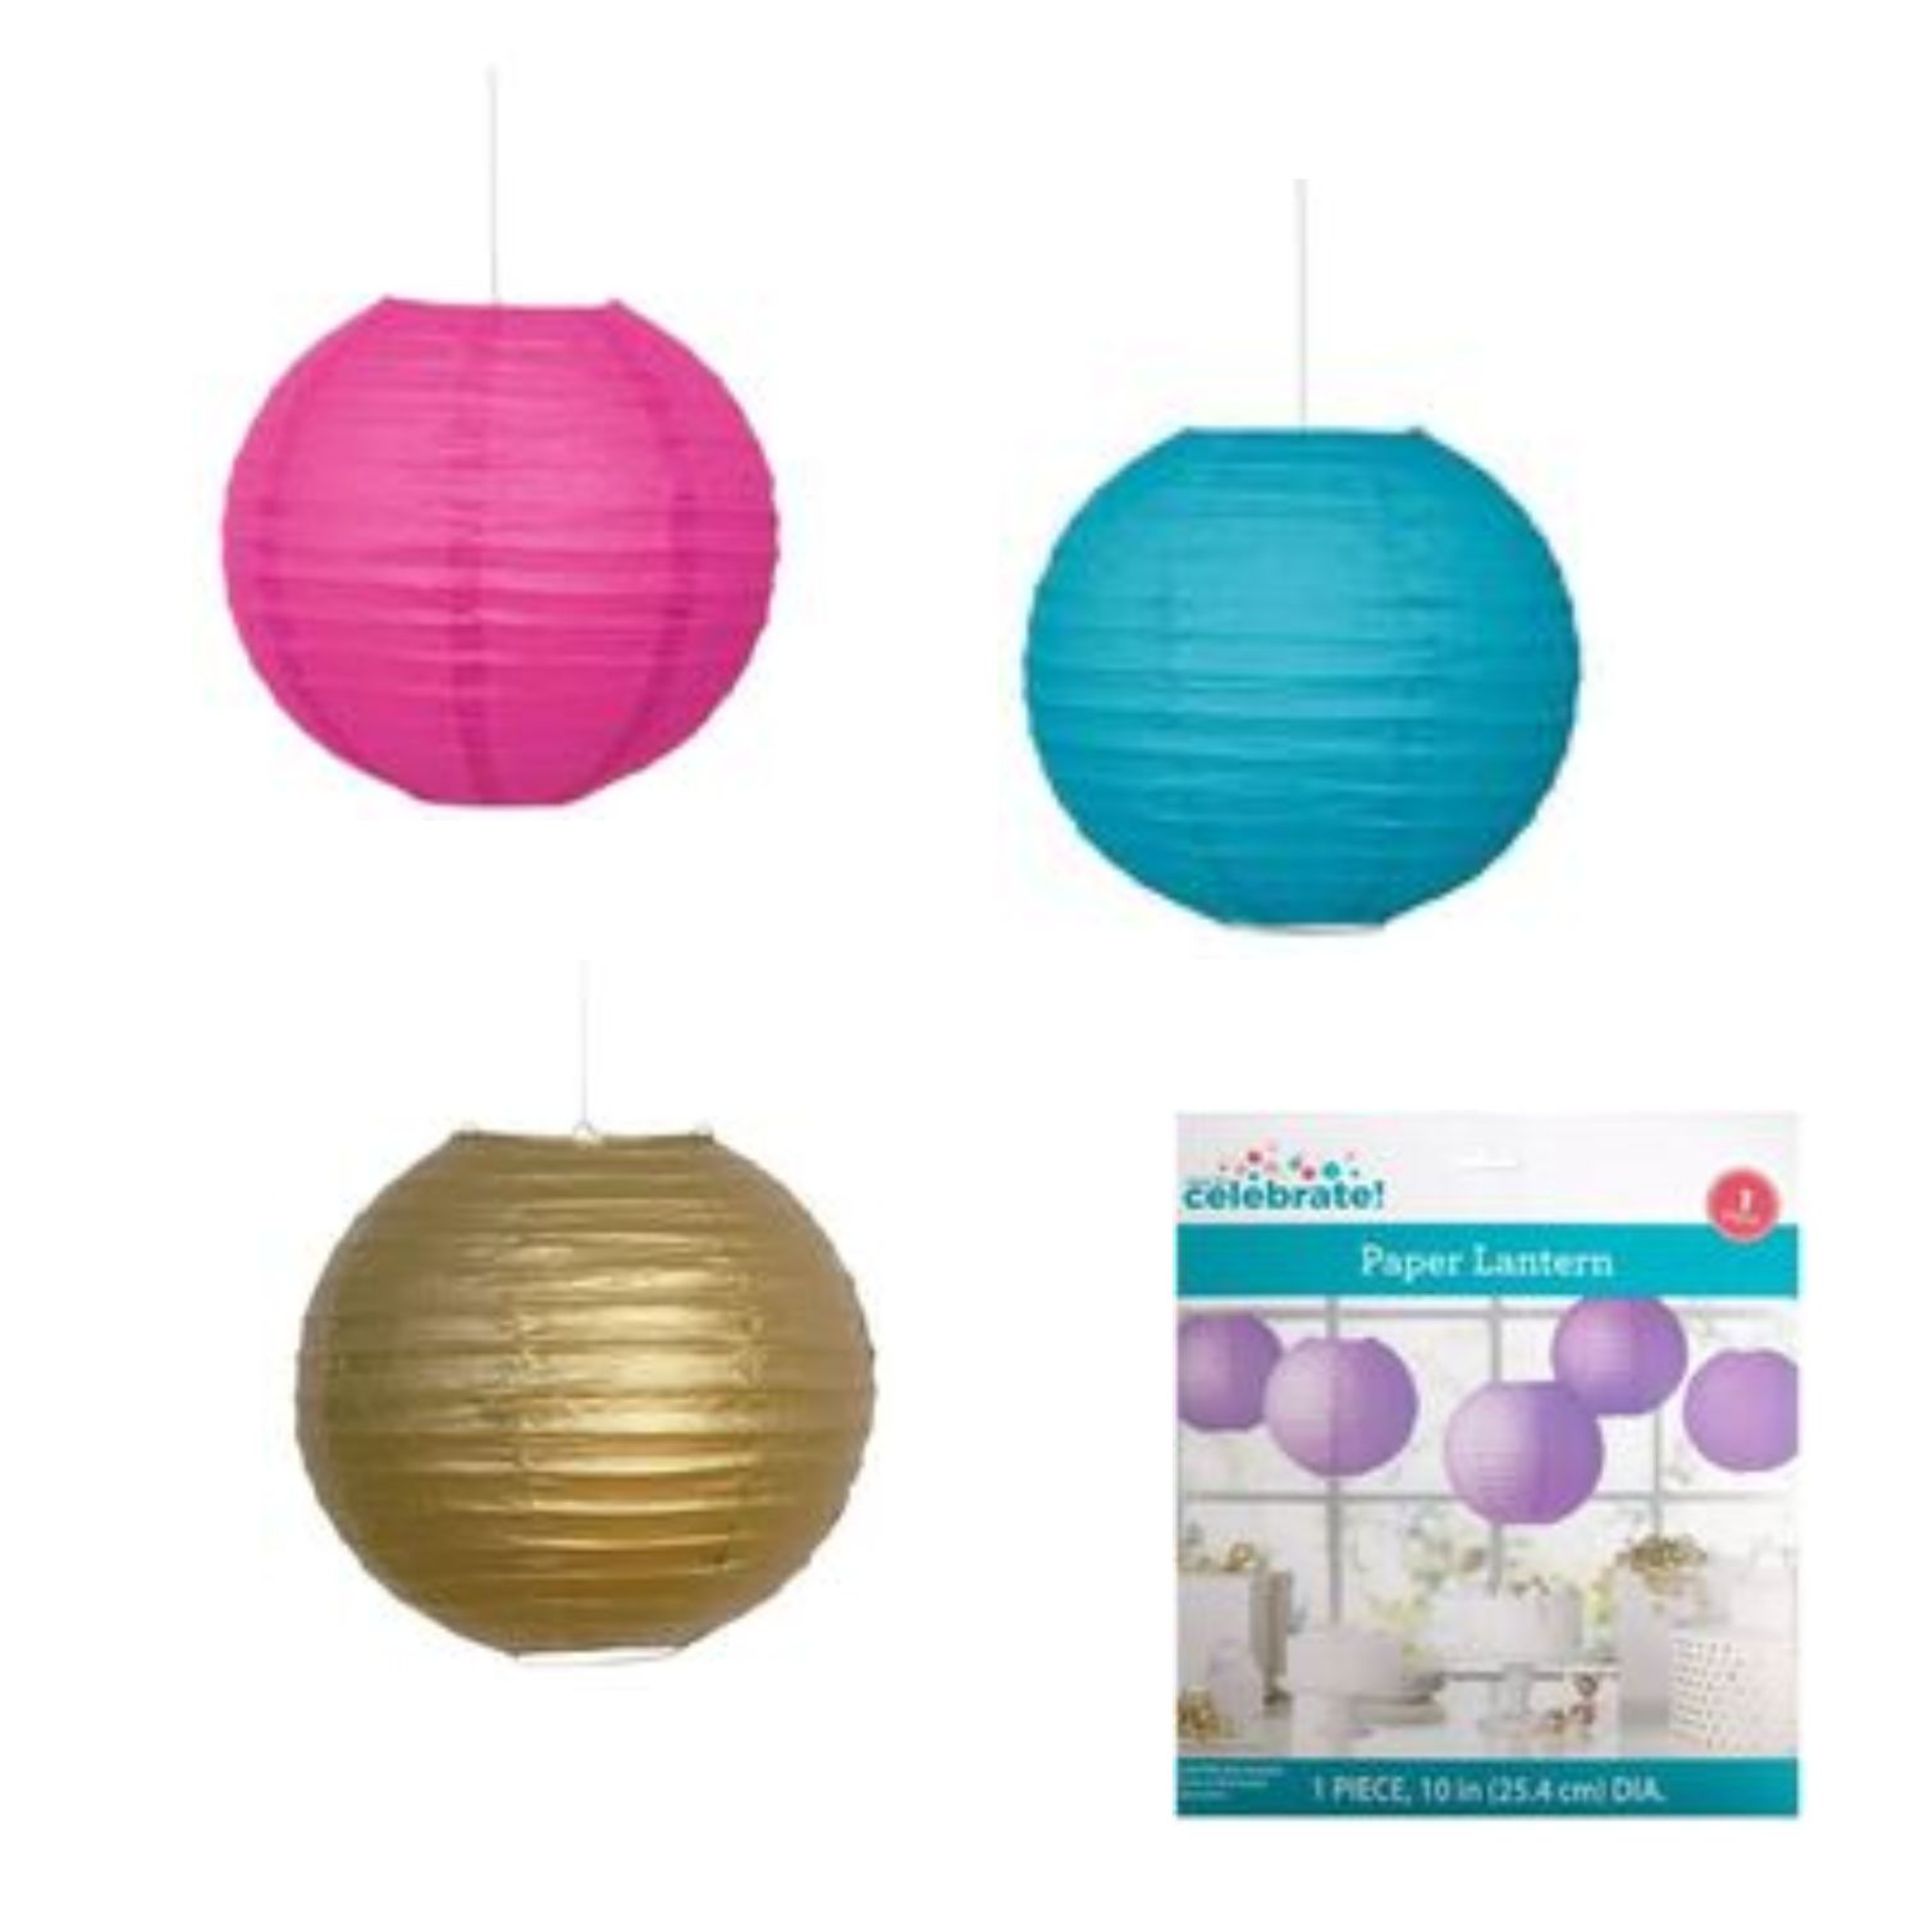 2500 PAPER LANTERNS, ASSORTMENT OF COLOURS, GOLD, PINK,PURPLE,TEAL, RRP £25,000